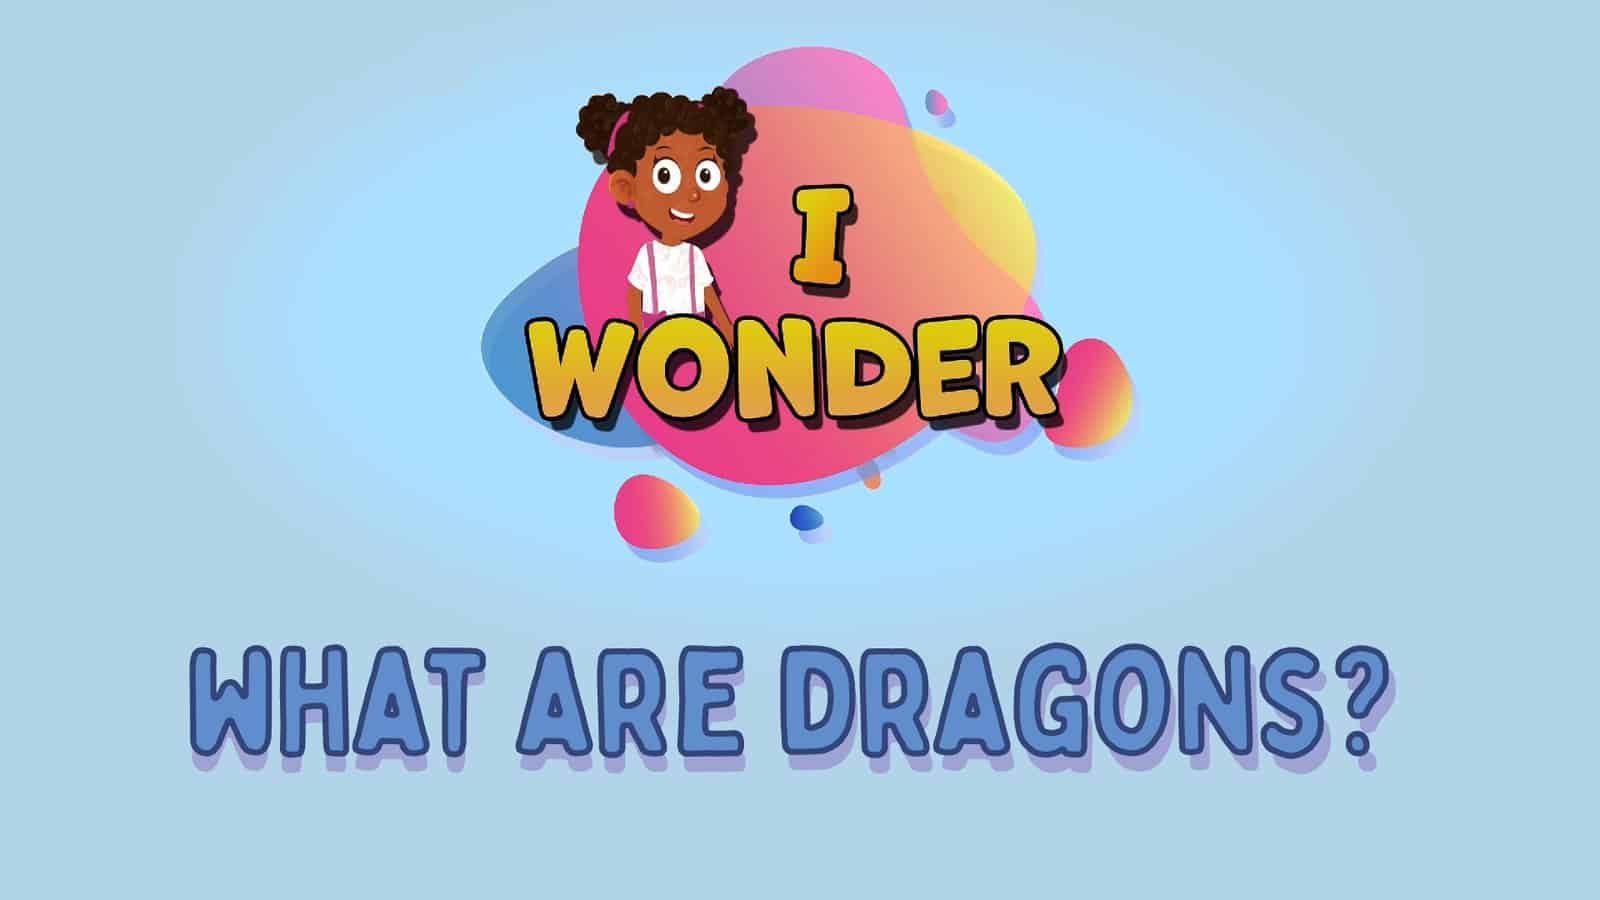 What Are Dragons?